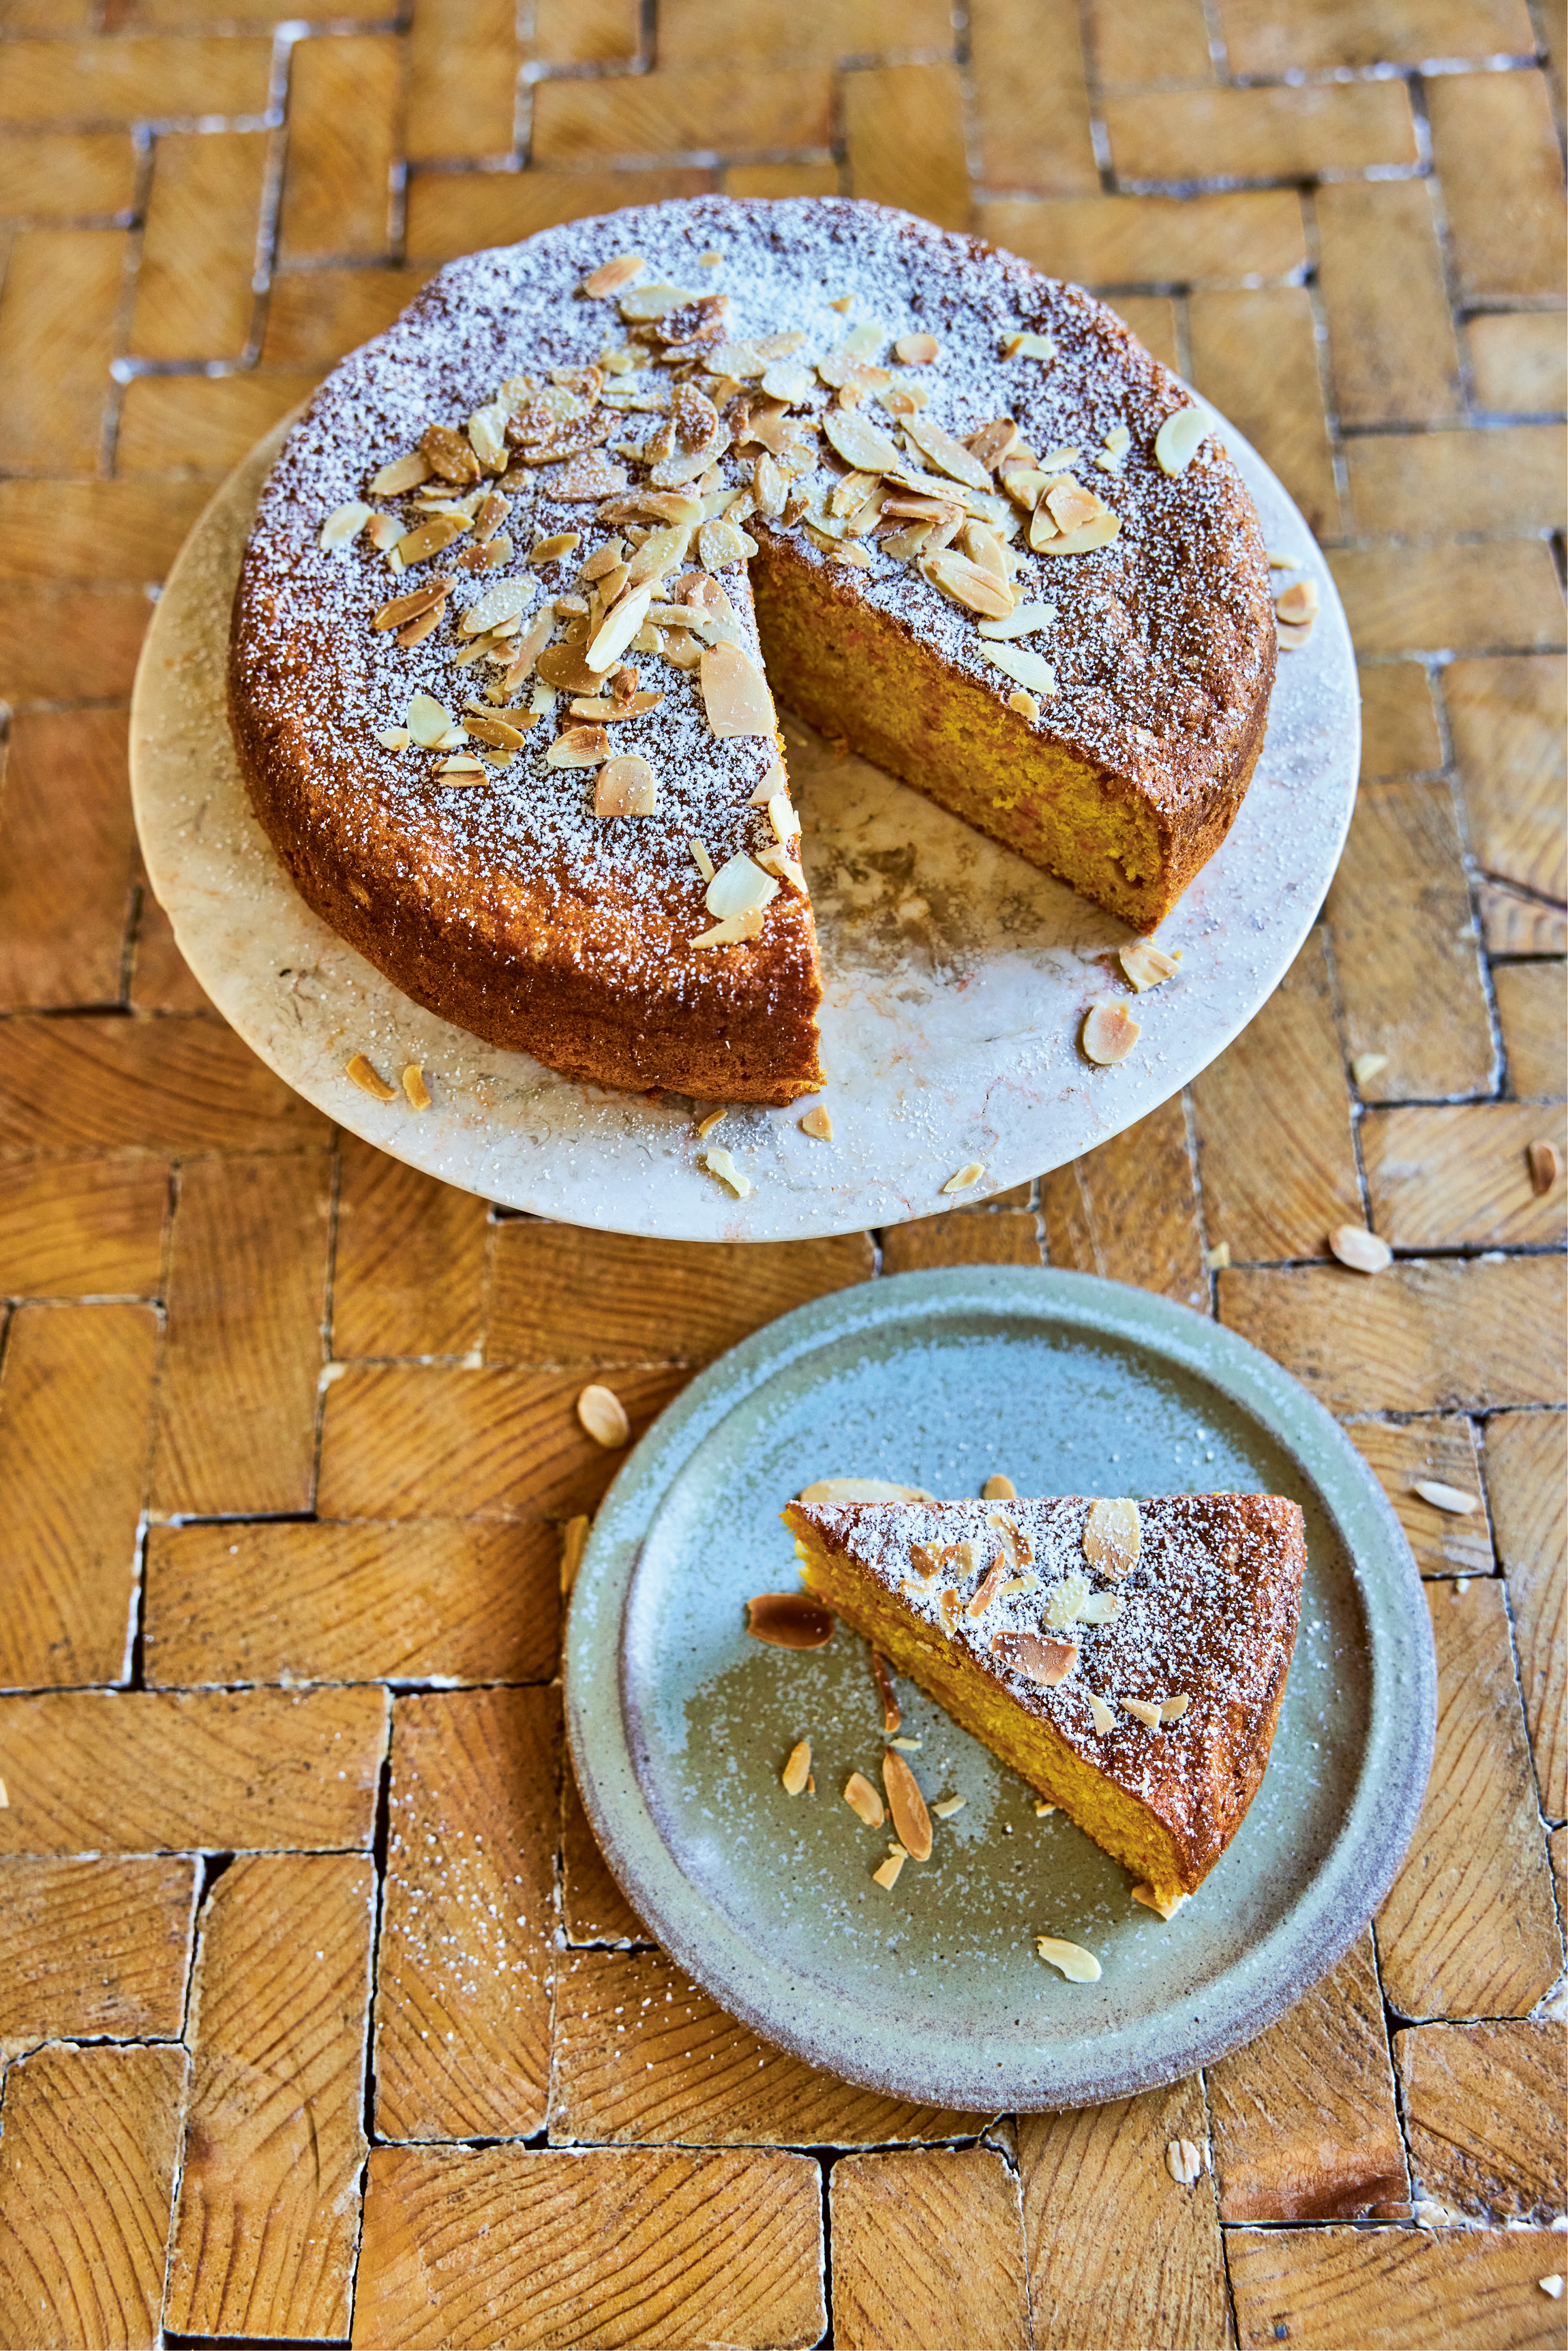 Carrot and almond cake from Gennaro's Verdure